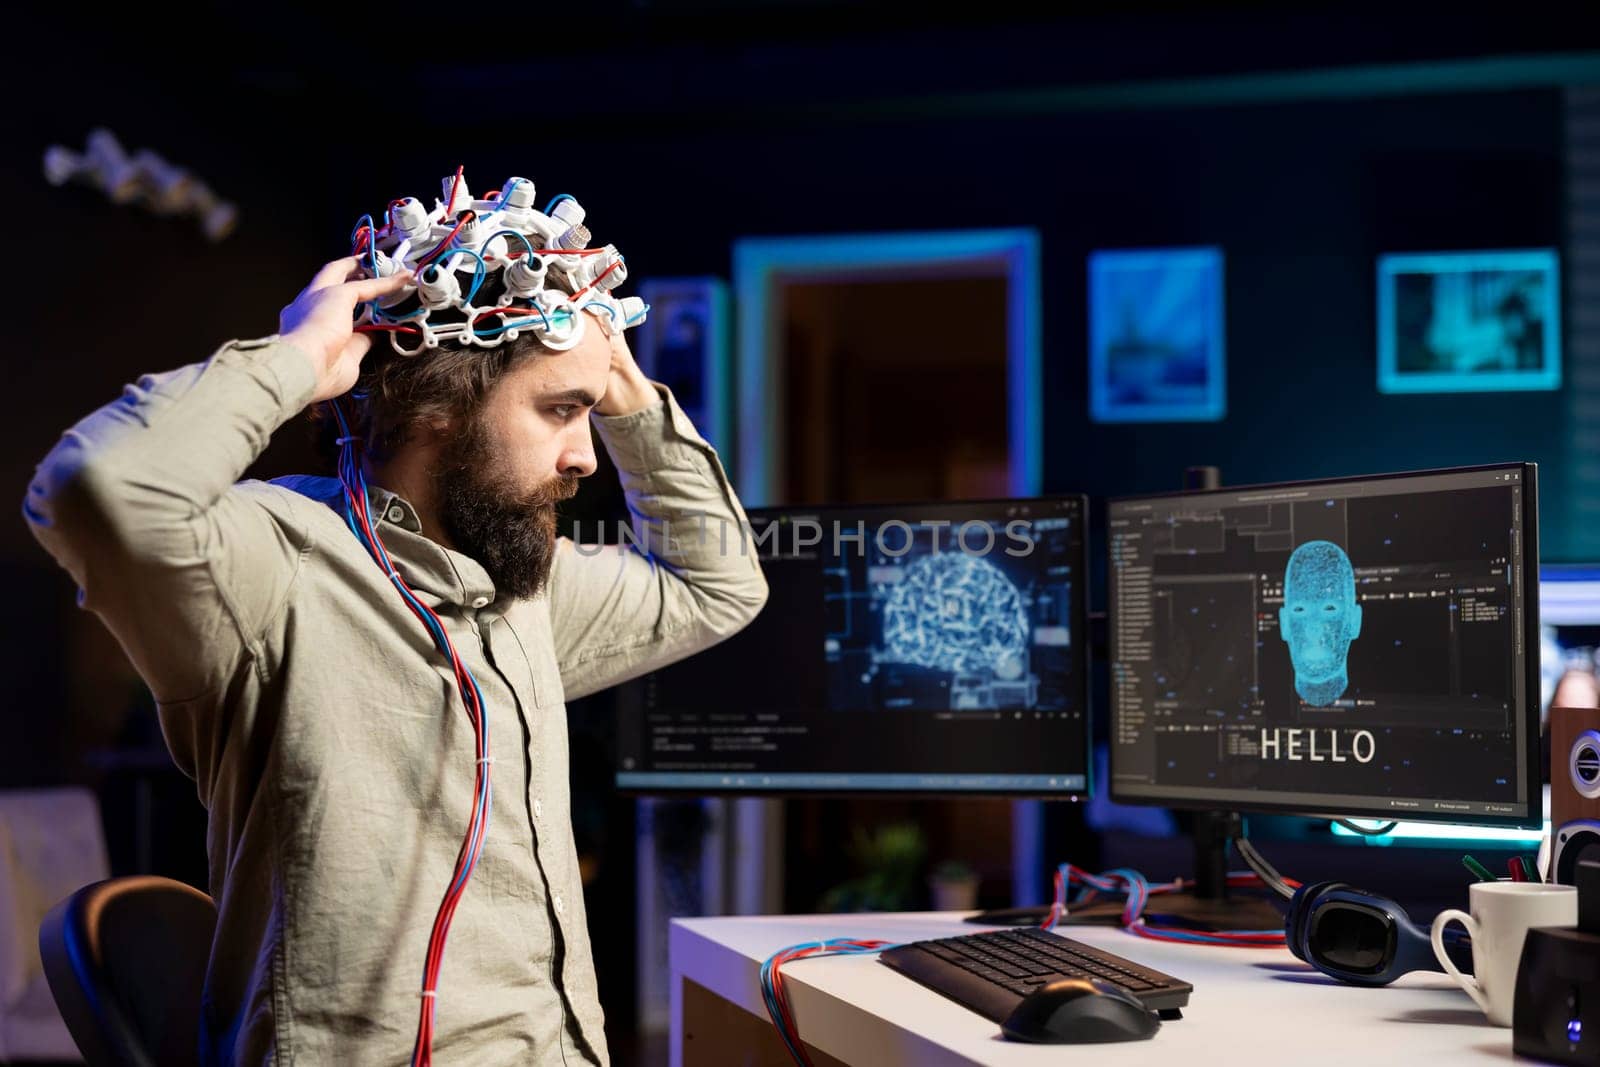 IT specialist putting EEG headset on to communicate with artificial intelligence by DCStudio